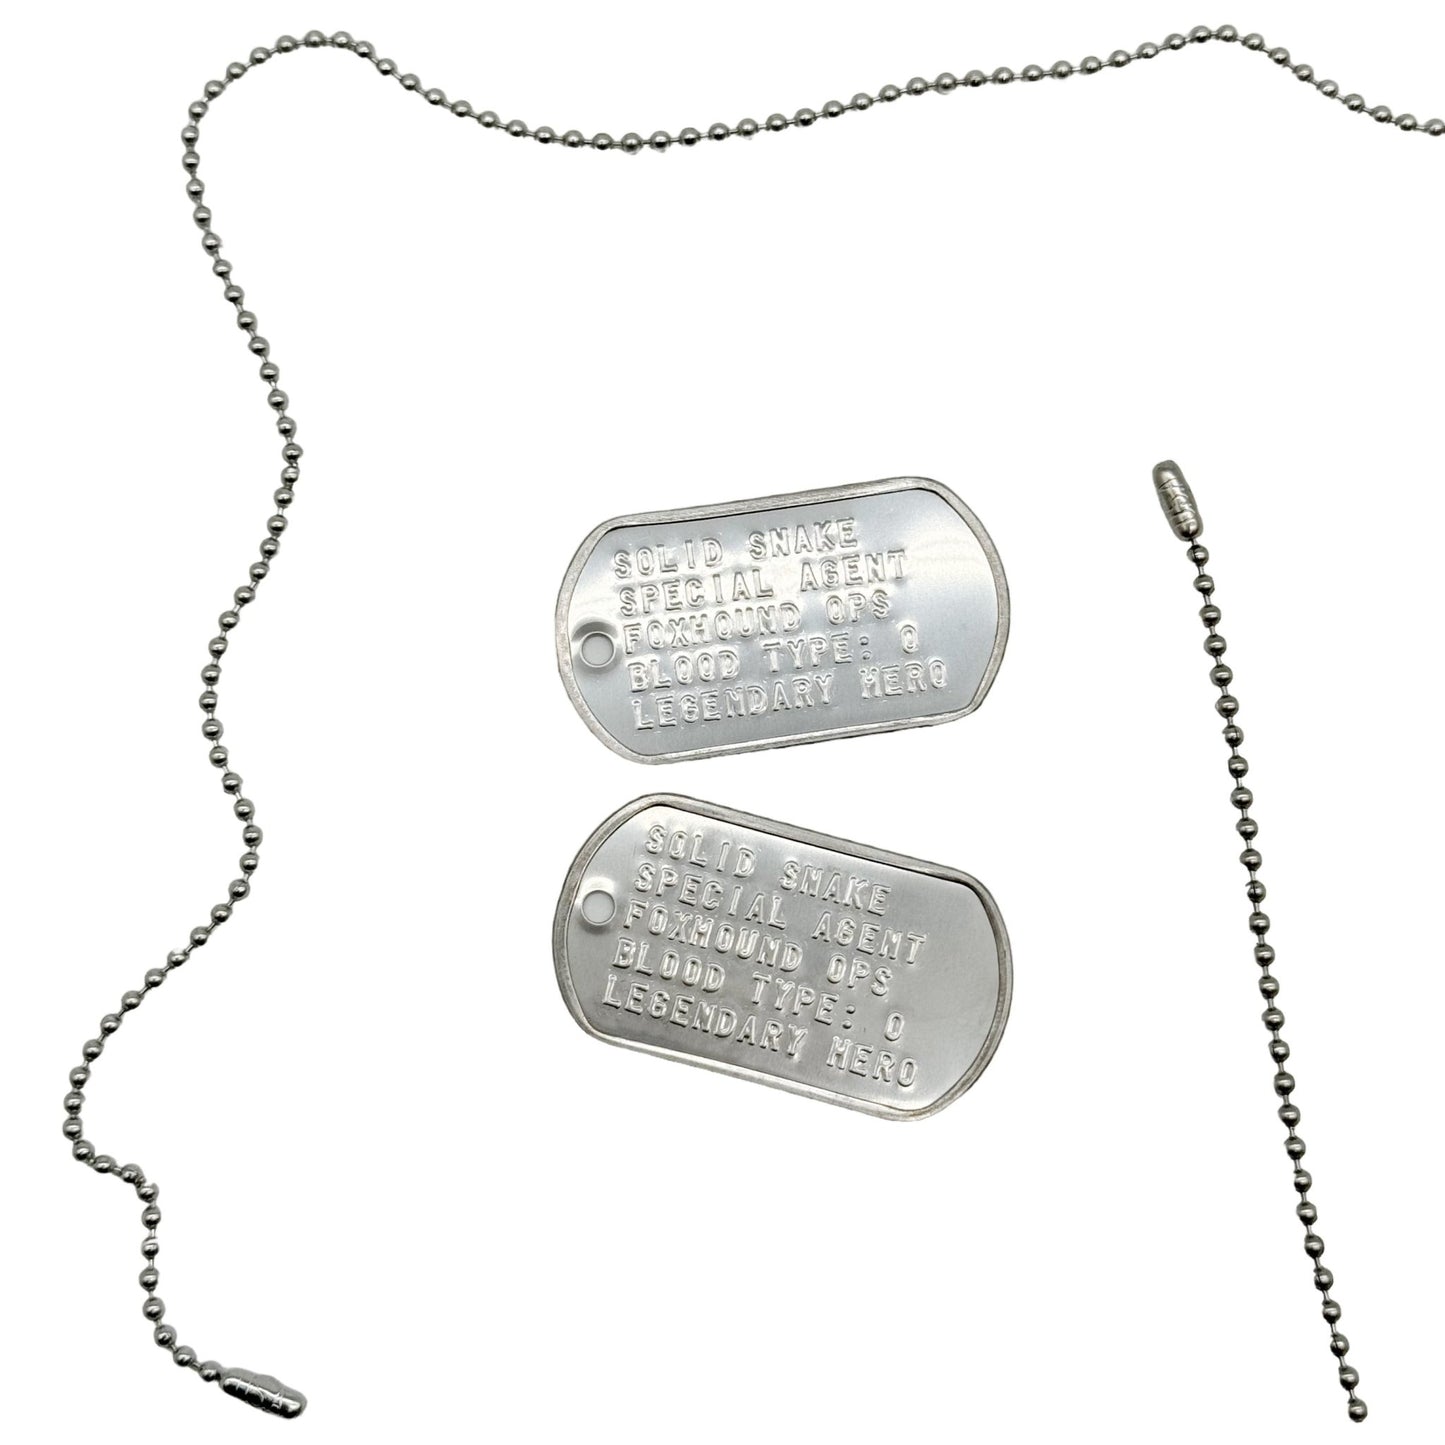 'SOLID SNAKE' US Military Dog Tags Necklace Pendant Gaming Gift Collector Inspired - TheDogTagCo